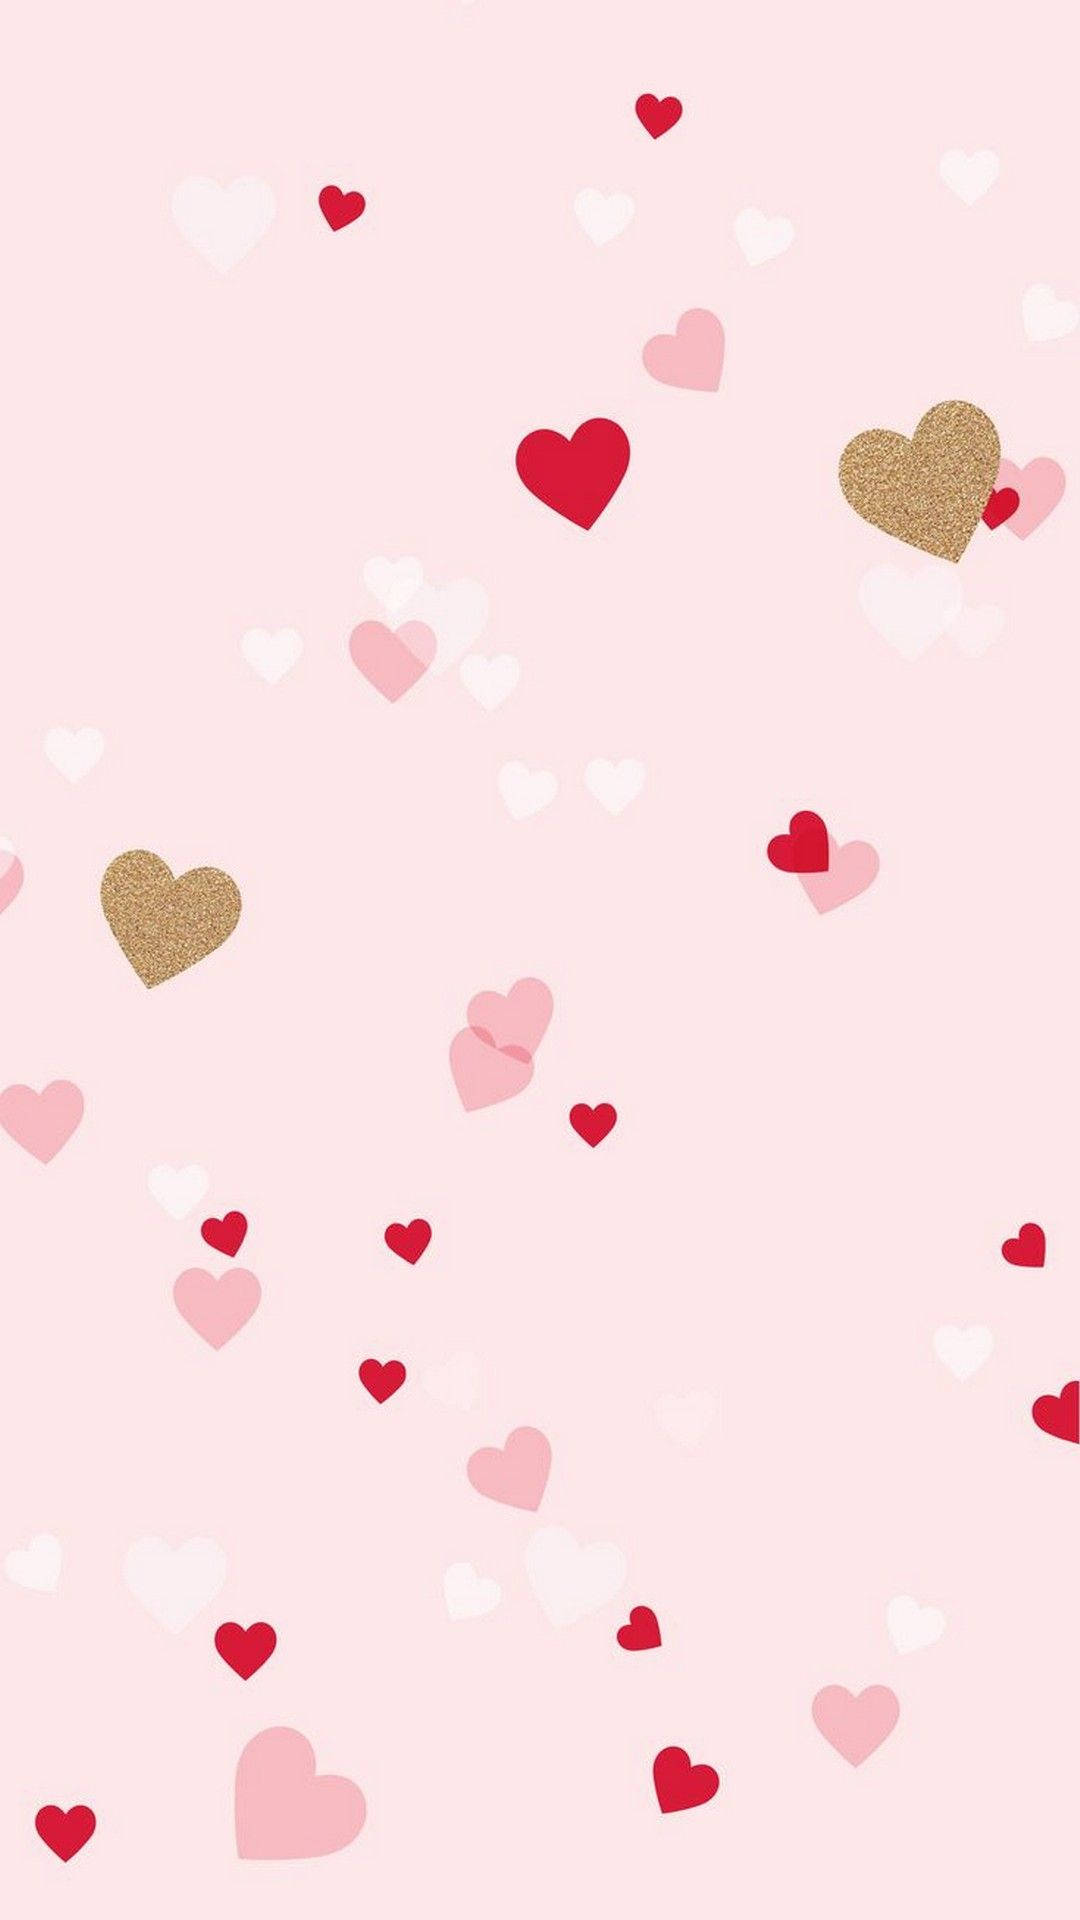 Valentine's Day Background With Hearts Wallpaper